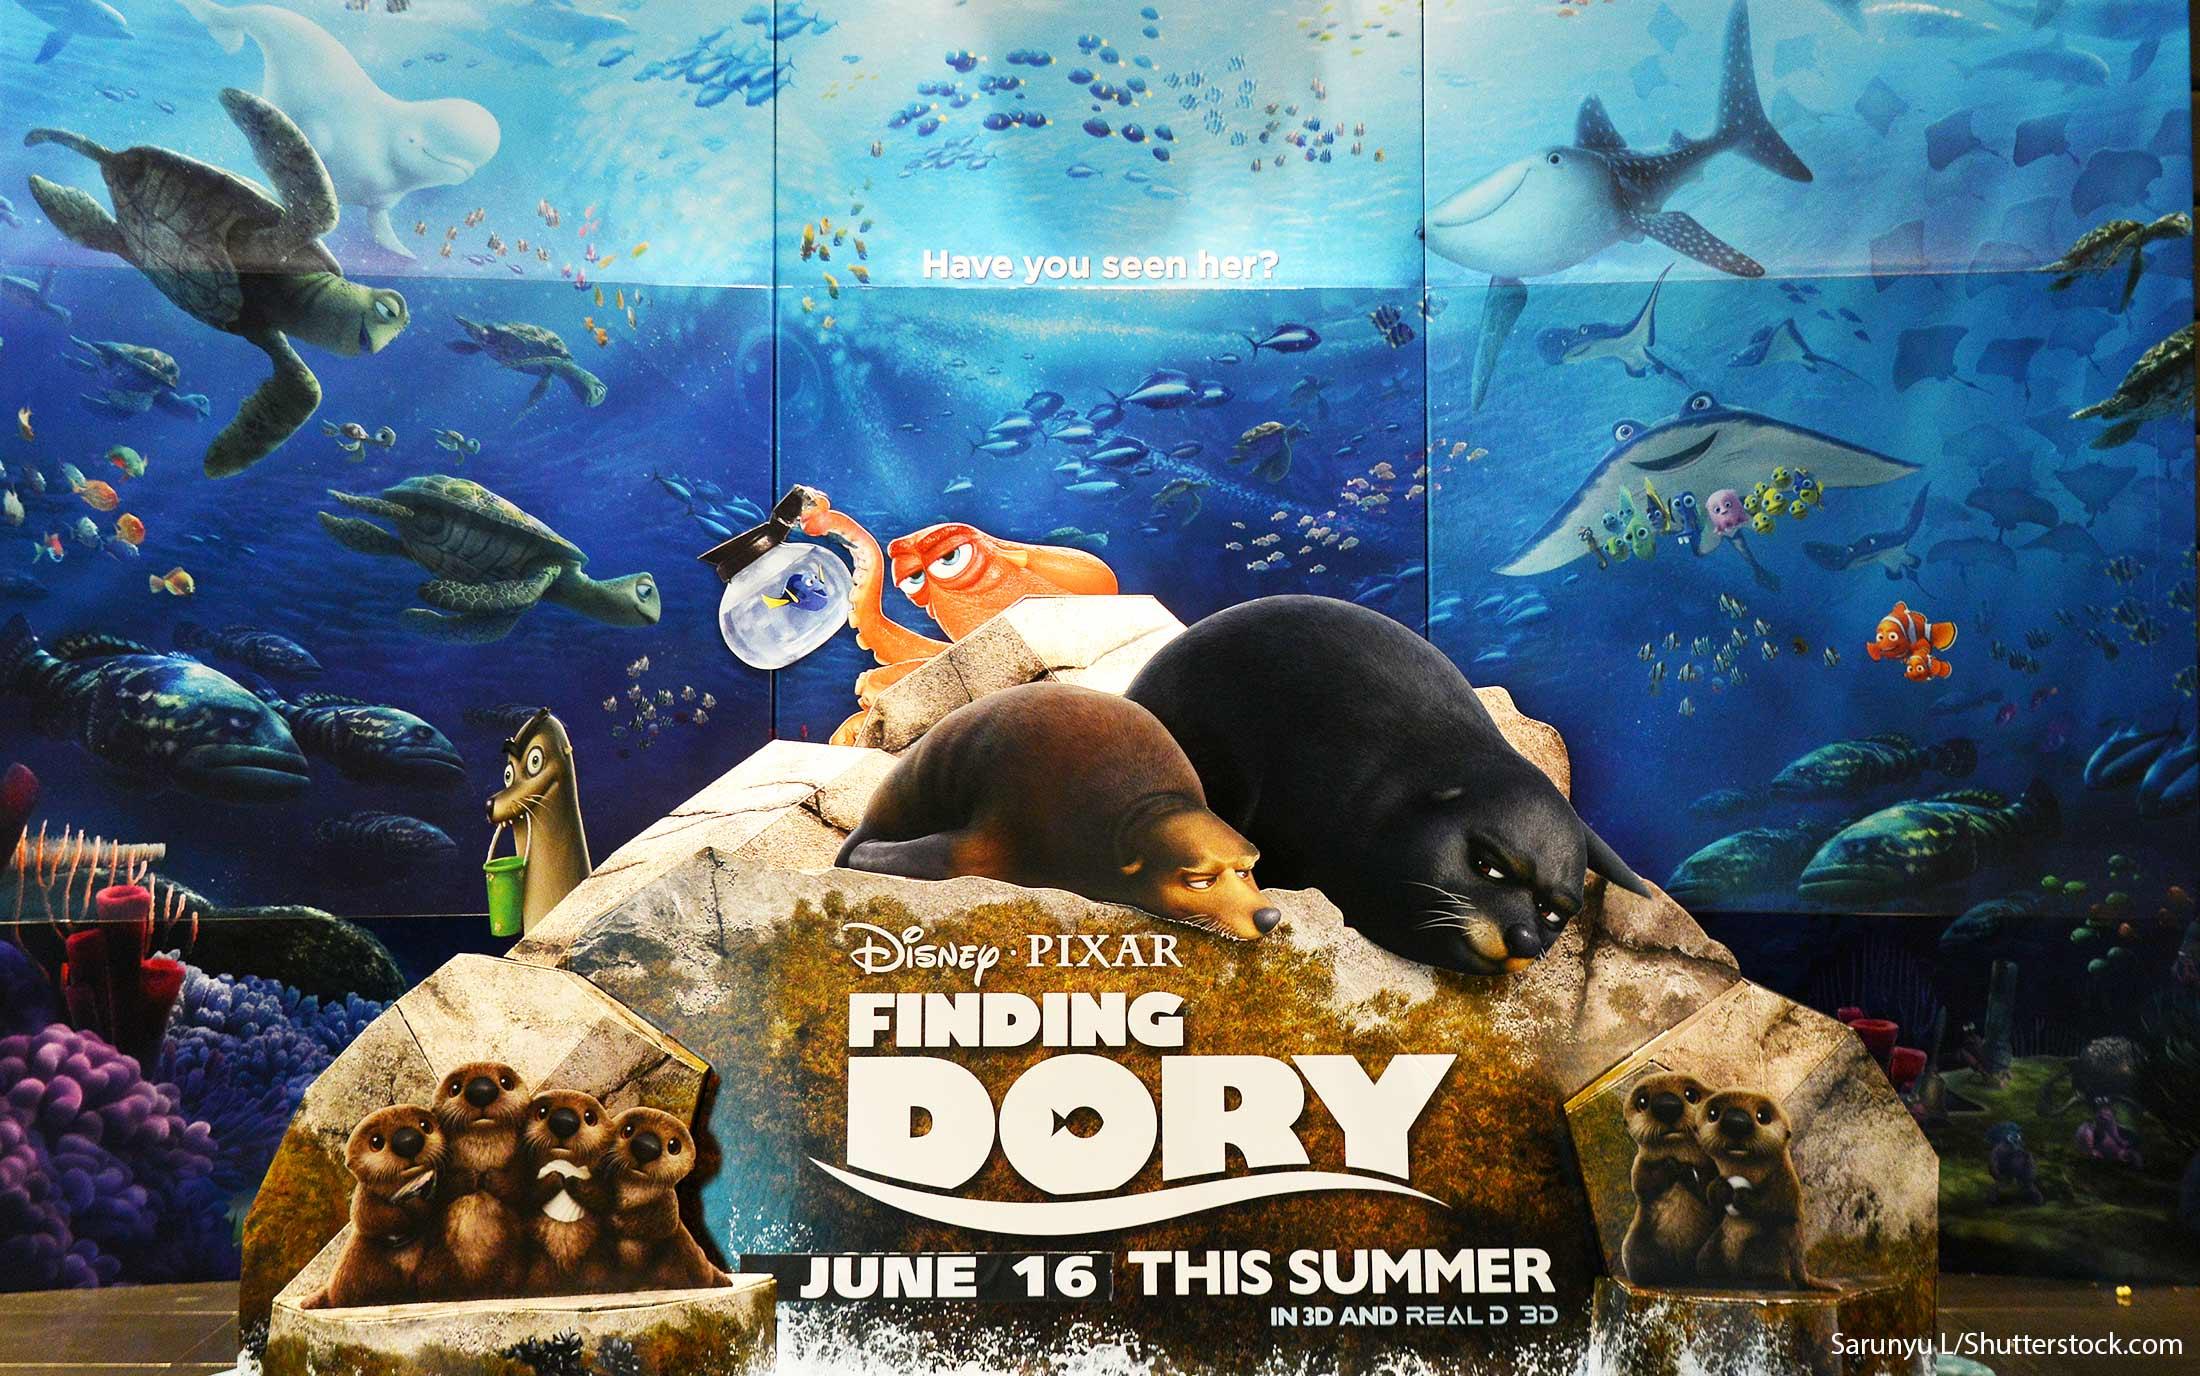 'Finding Dory' movie